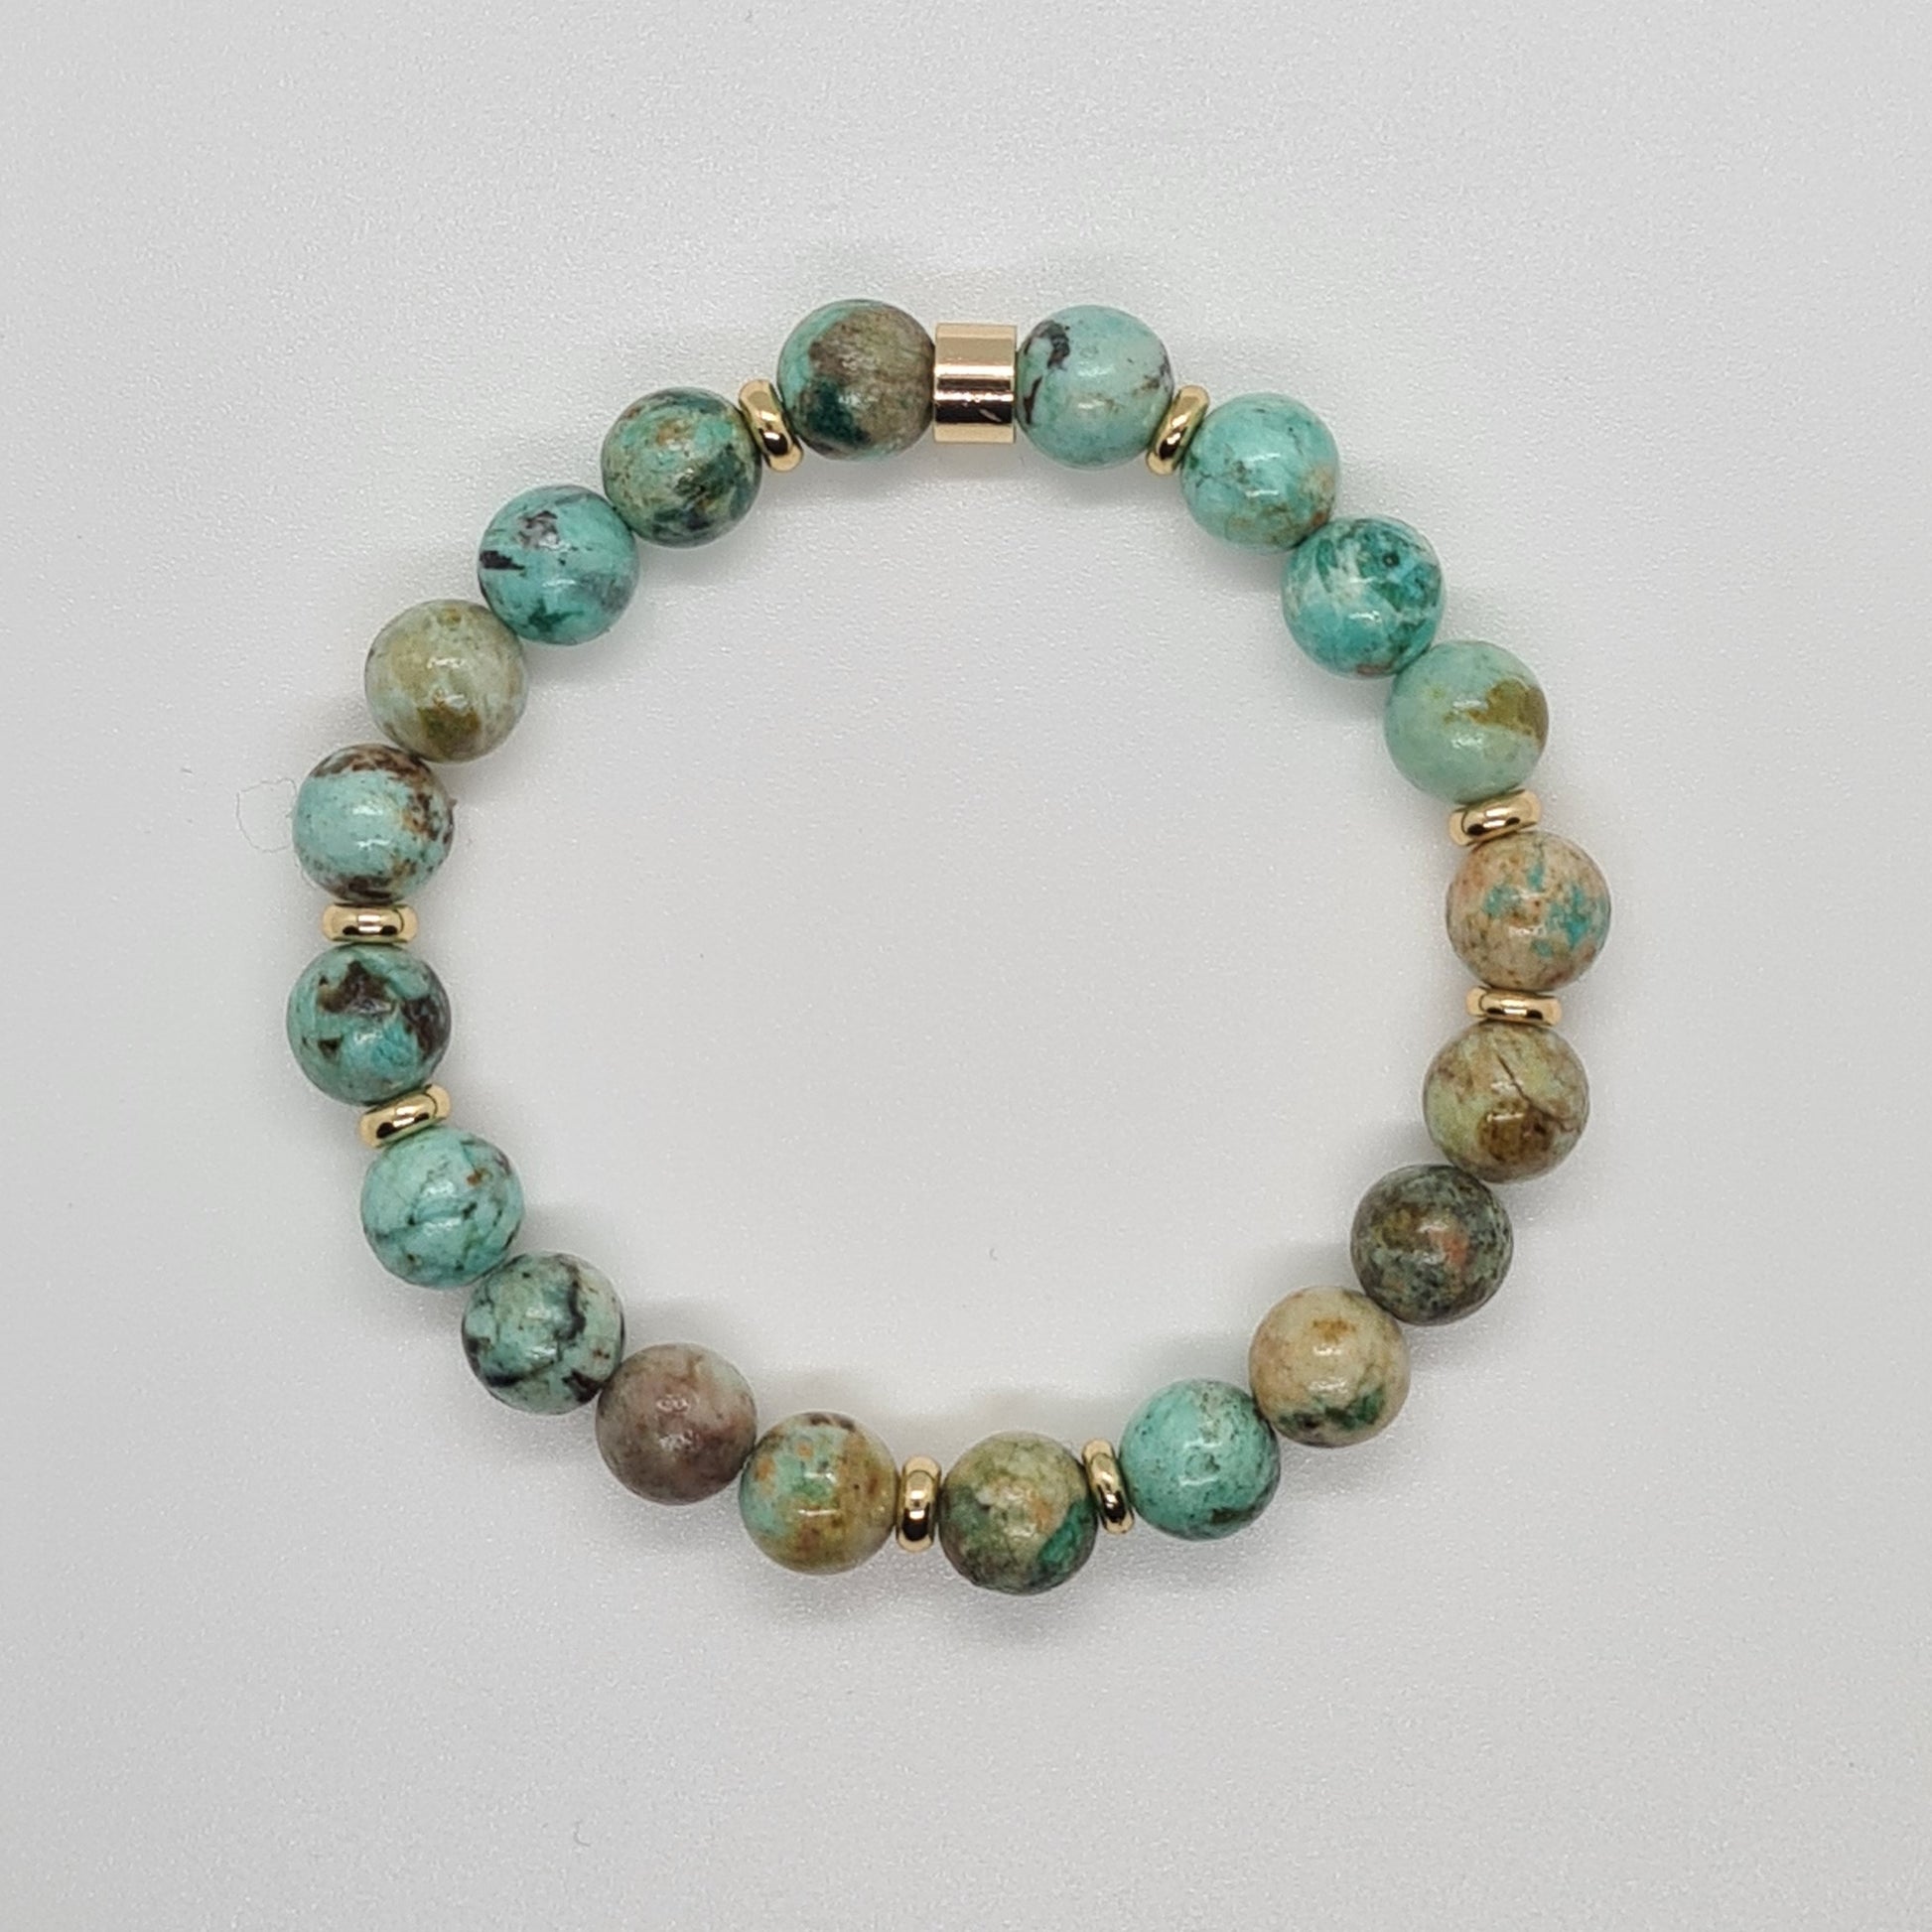 A chrysocolla gemstone bracelet in 8mm beads with gold accessories from above